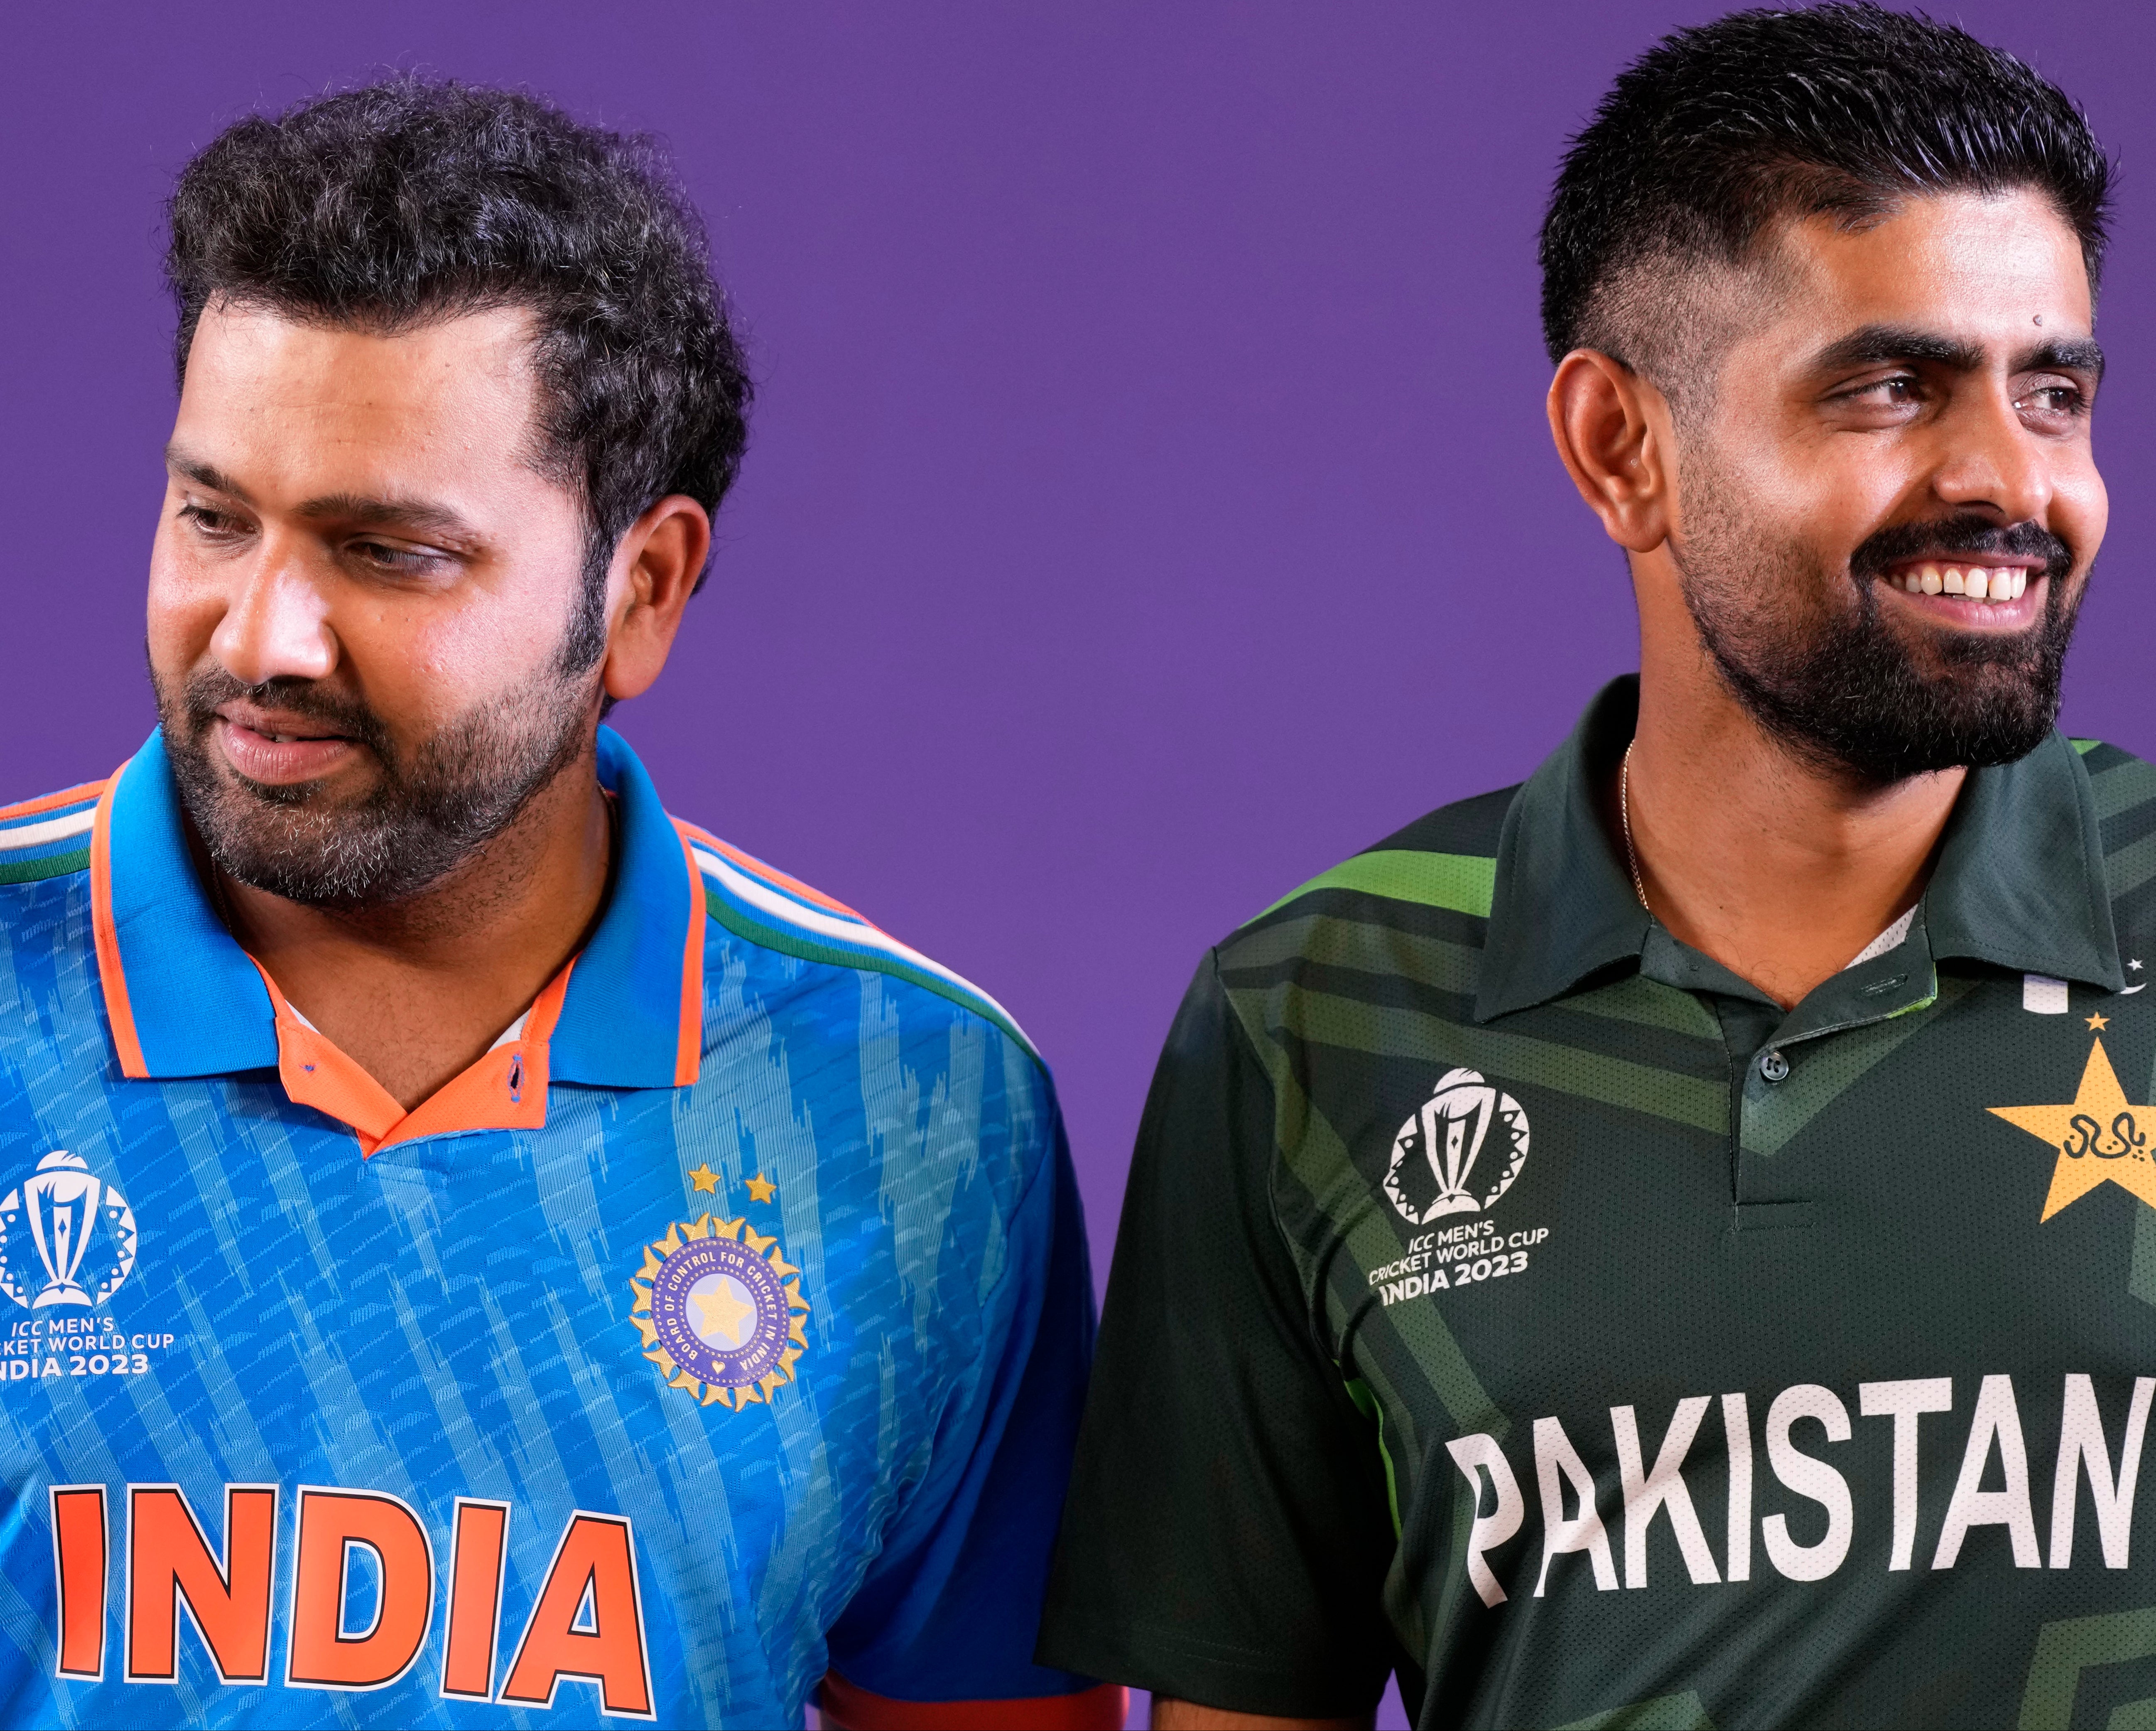 India’s captain Rohit Sharma and Pakistan’s captain Babar Azam during captain’s press conference on the eve of ICC Men’s Cricket World Cup in Ahmedabad